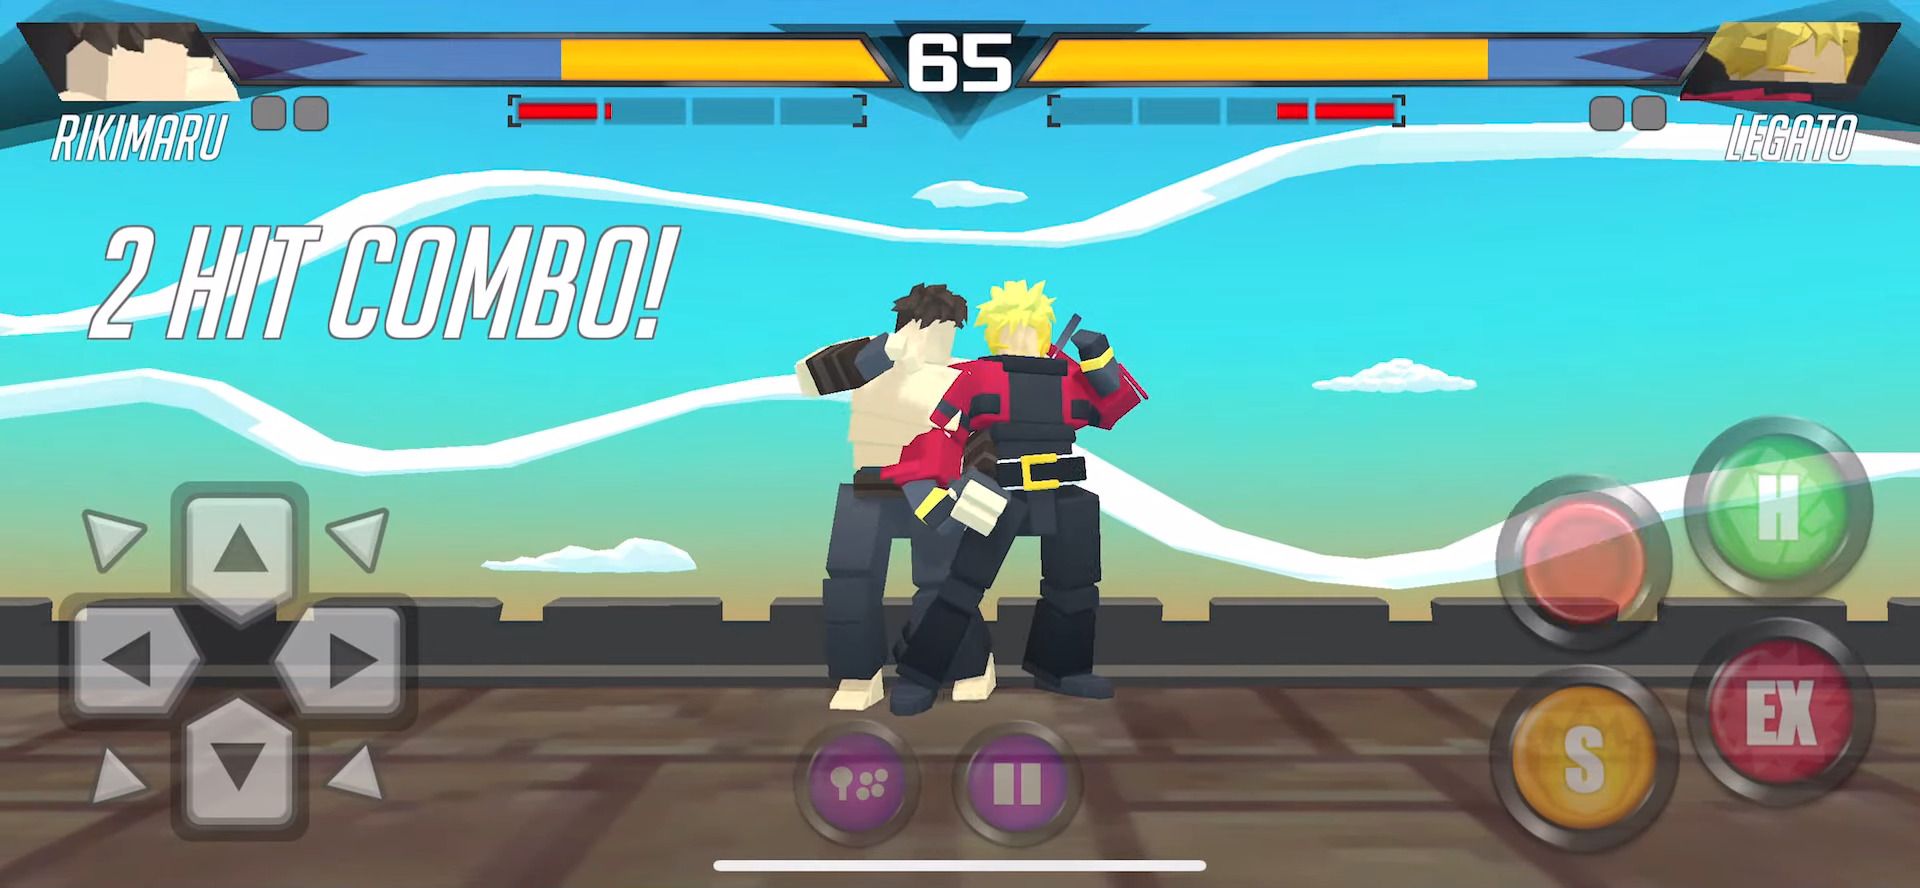 Full version of Android Controller Support game apk Vita Fighters for tablet and phone.